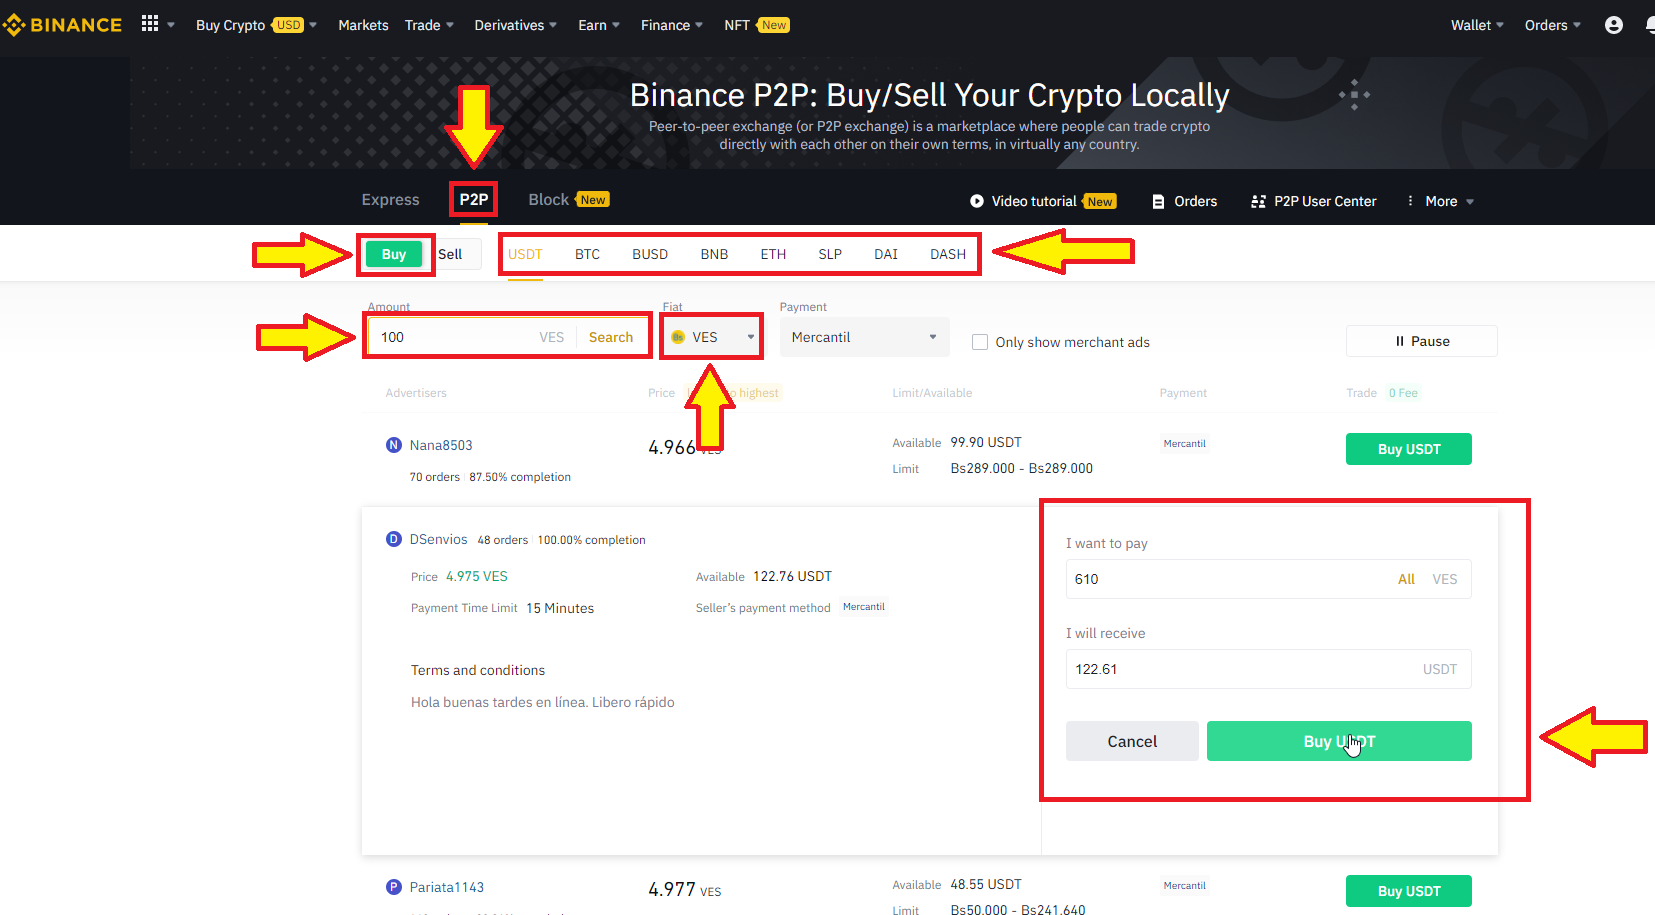 Buy CEEK VR crypto in P2P with a verified account on Binance